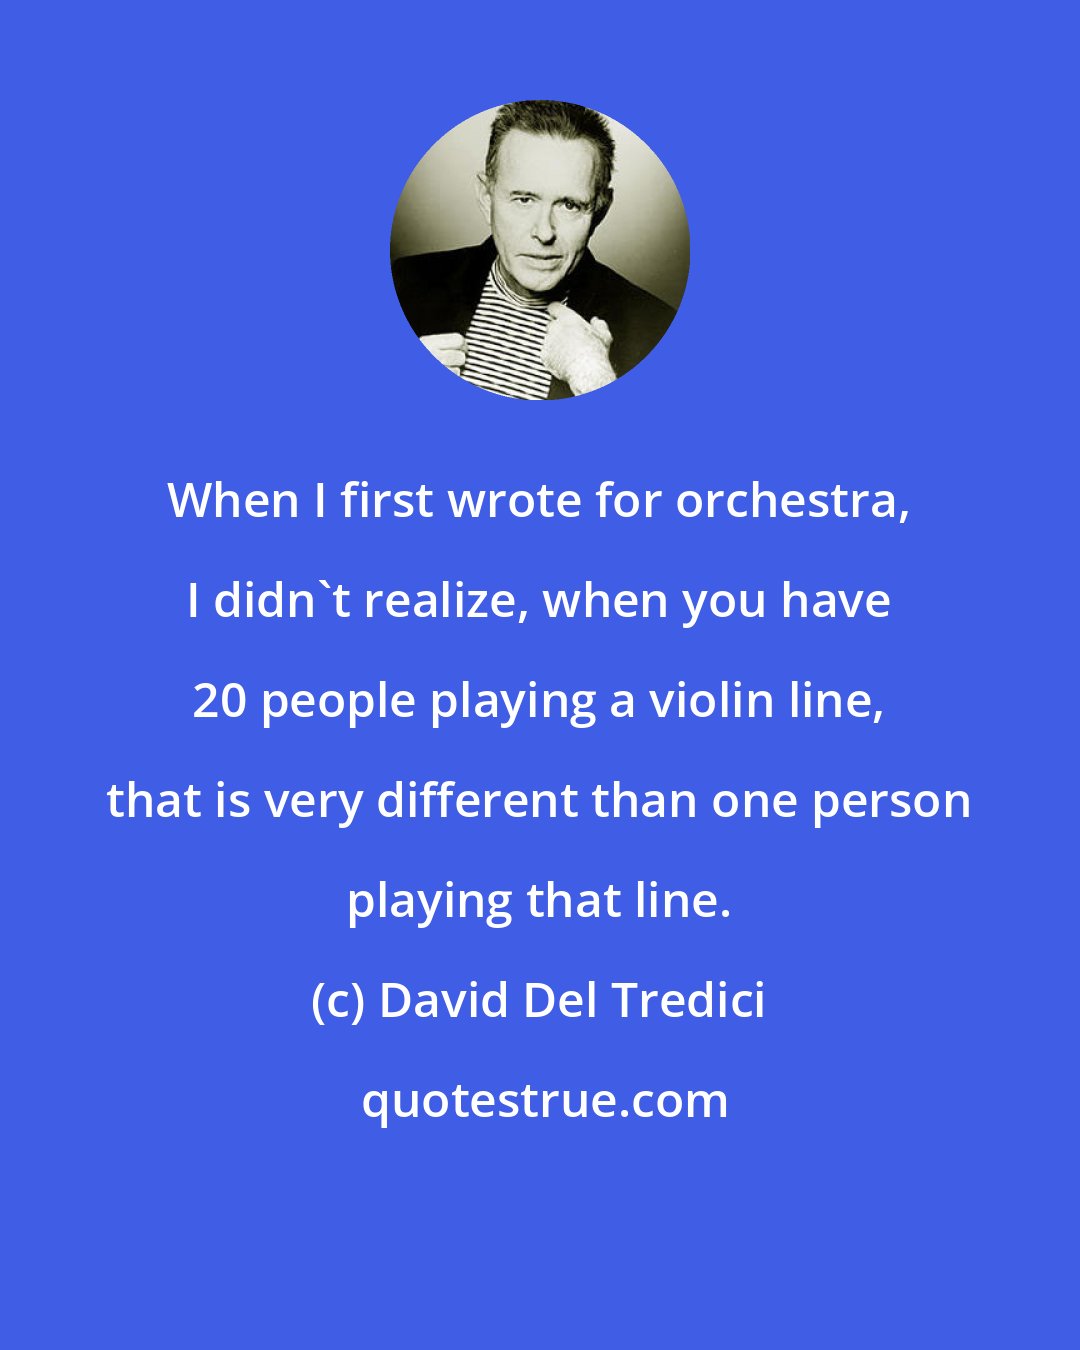 David Del Tredici: When I first wrote for orchestra, I didn't realize, when you have 20 people playing a violin line, that is very different than one person playing that line.